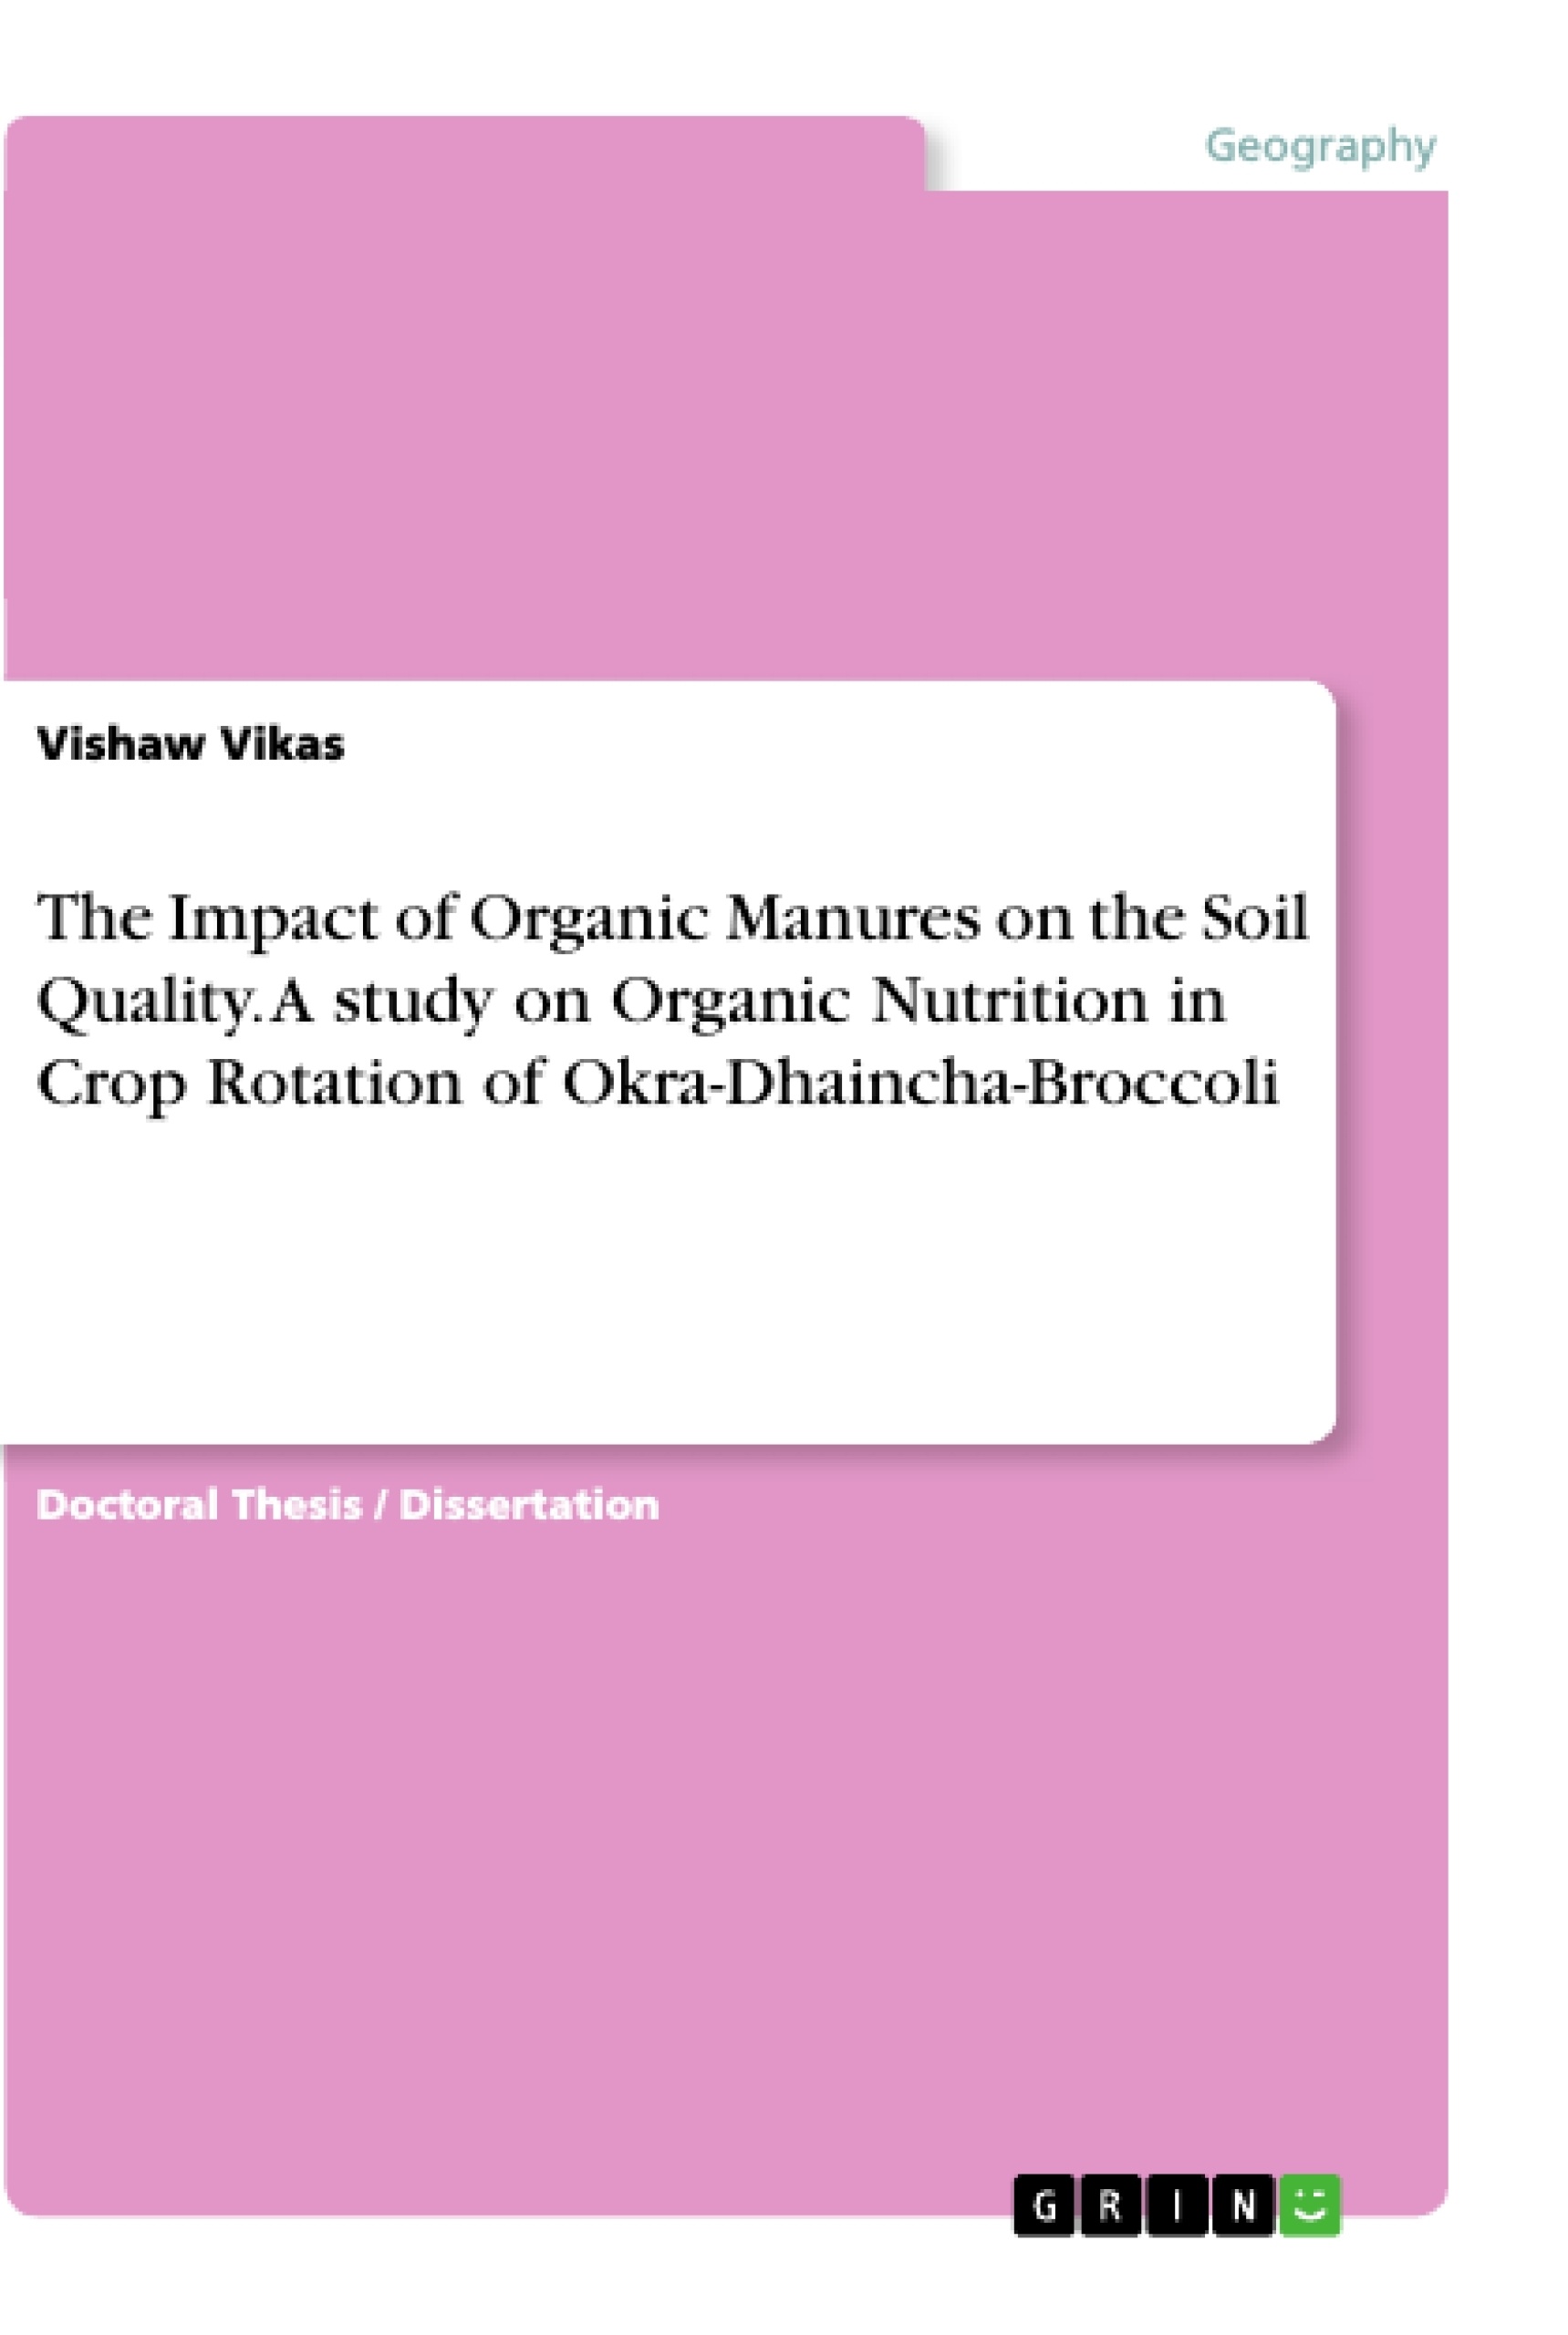 Título: The Impact of Organic Manures on the Soil Quality. A study on Organic Nutrition in Crop Rotation of Okra-Dhaincha-Broccoli